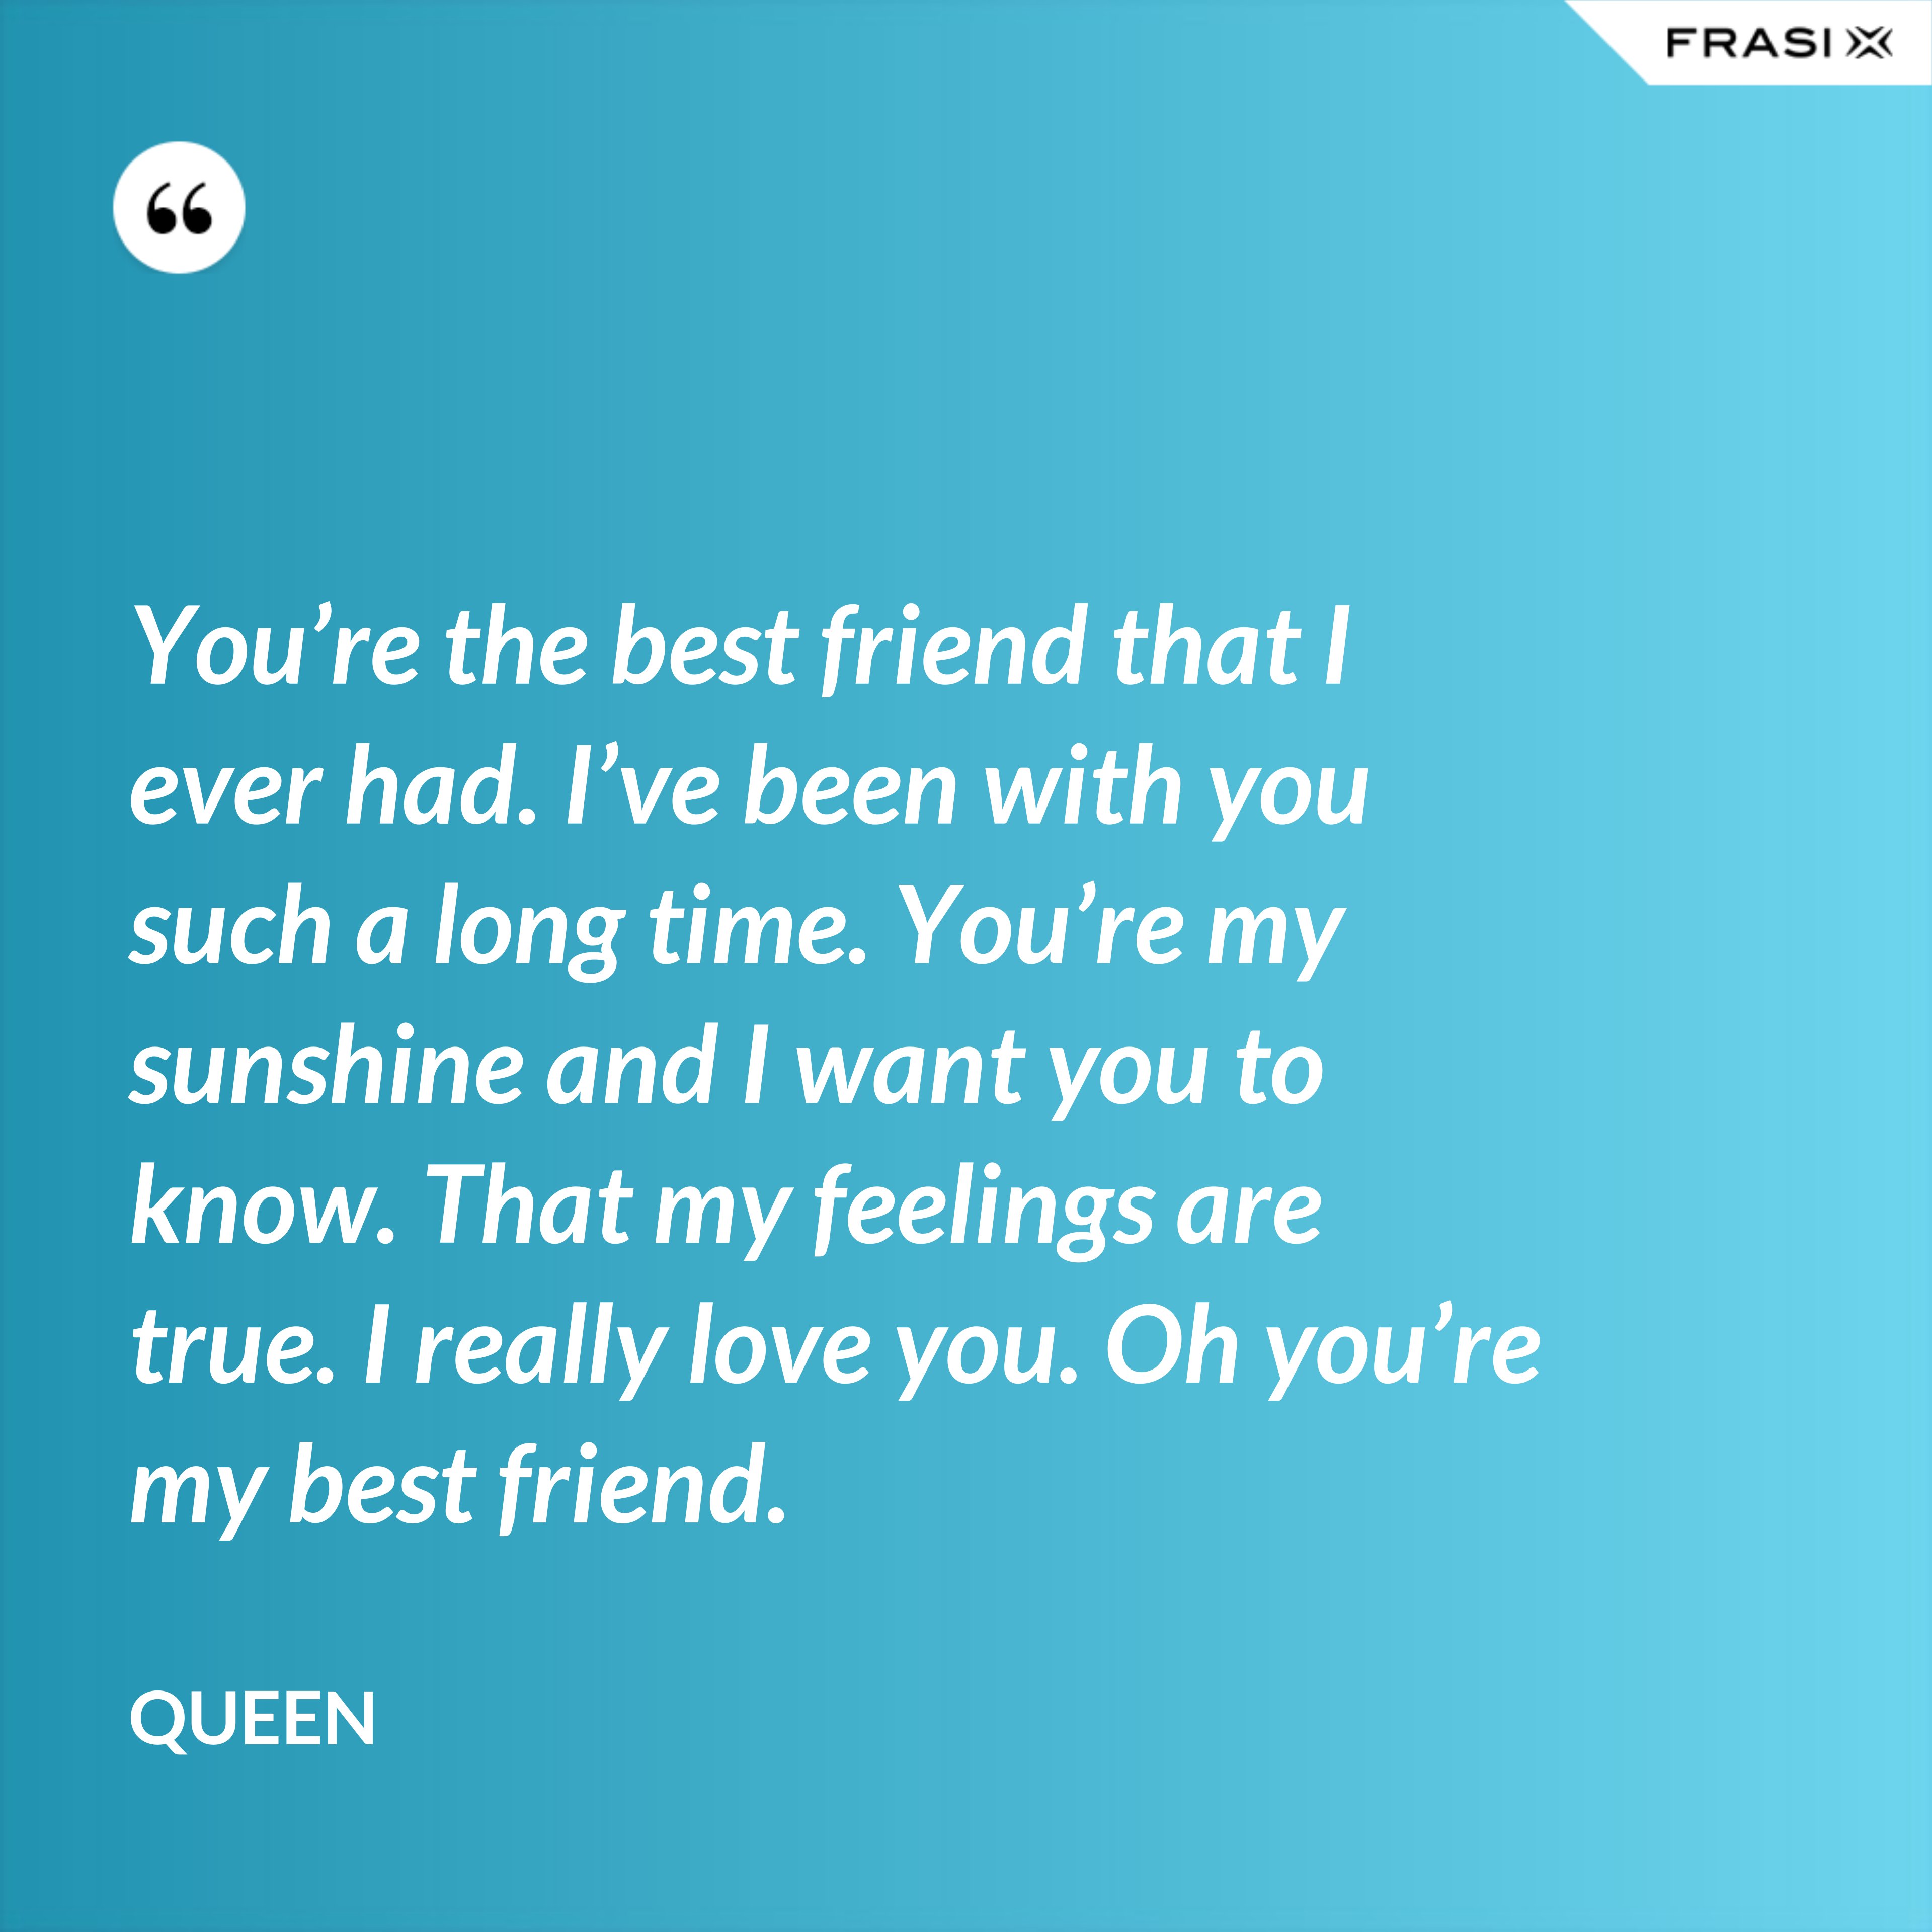 You’re the best friend that I ever had. I’ve been with you such a long time. You’re my sunshine and I want you to know. That my feelings are true. I really love you. Oh you’re my best friend. - Queen